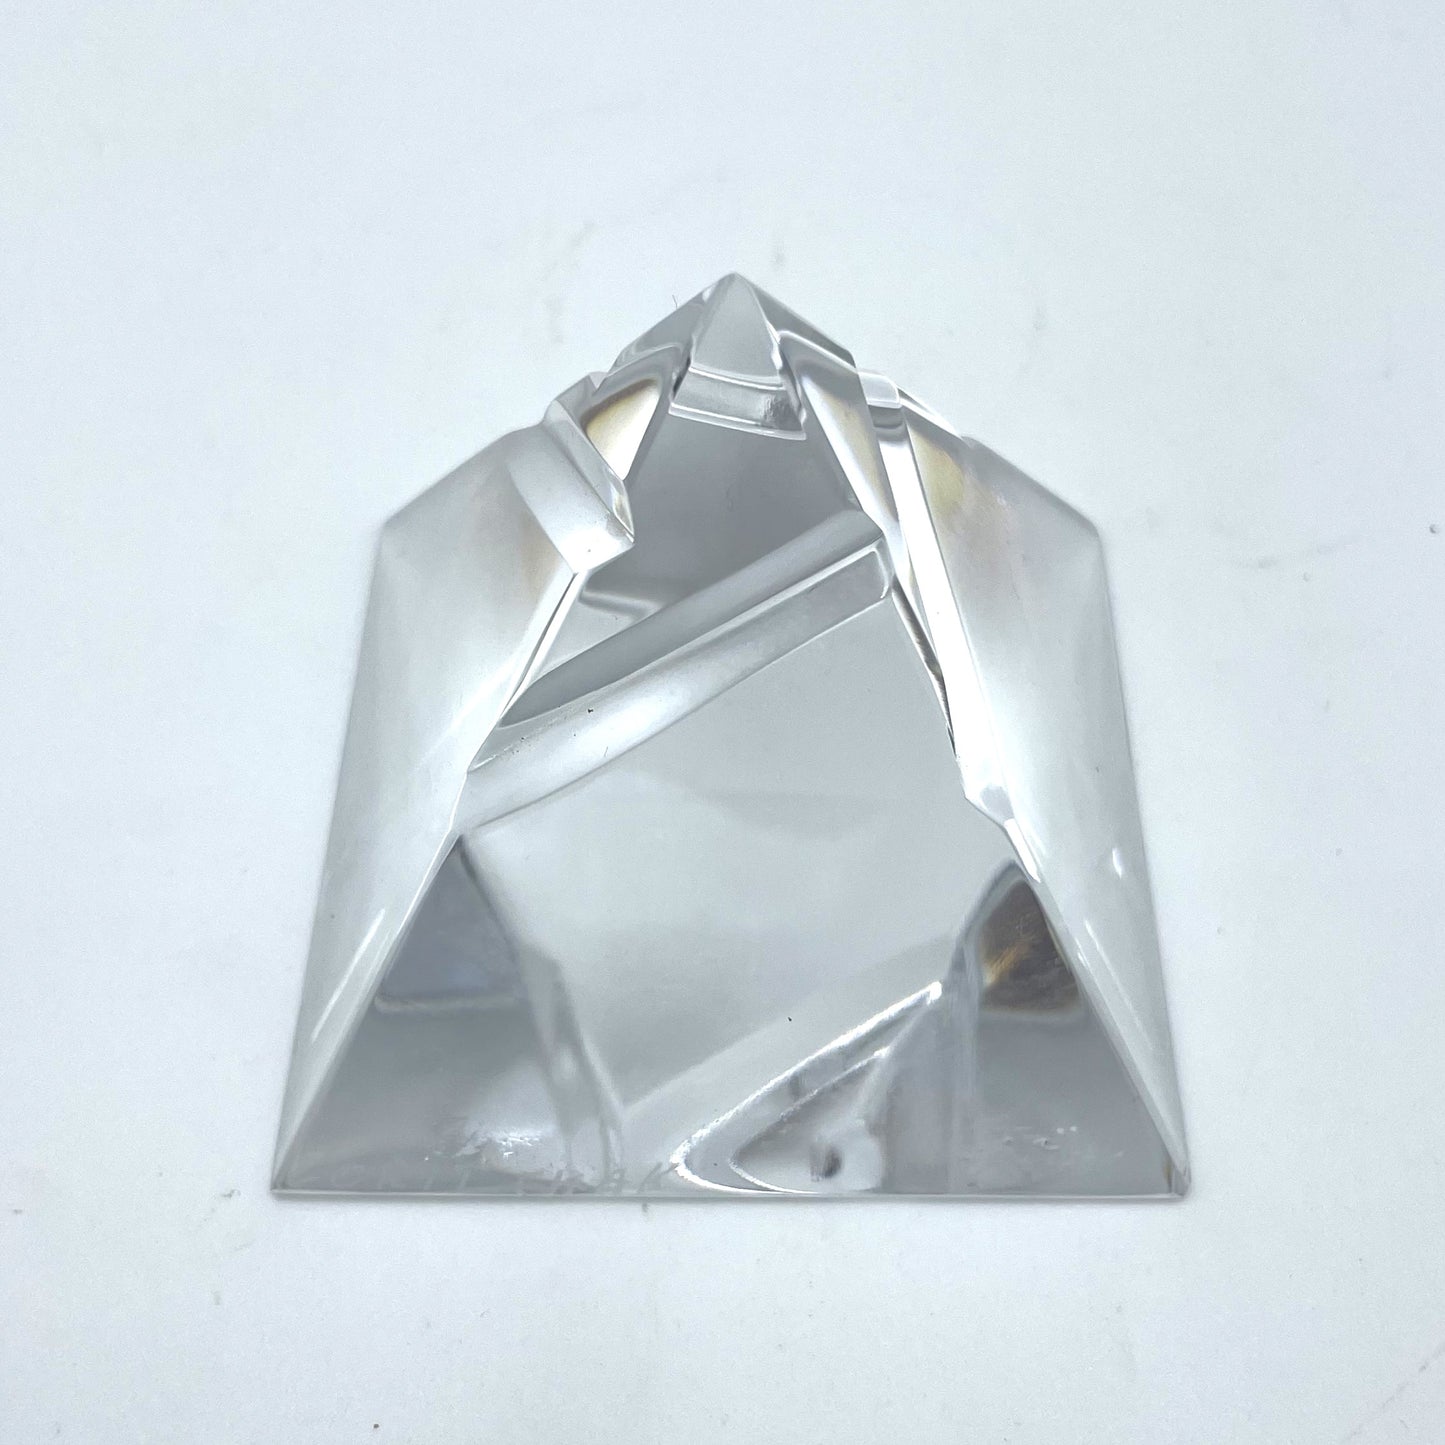 Signed Crystal Pyramid by Zorit Chak - 7cm